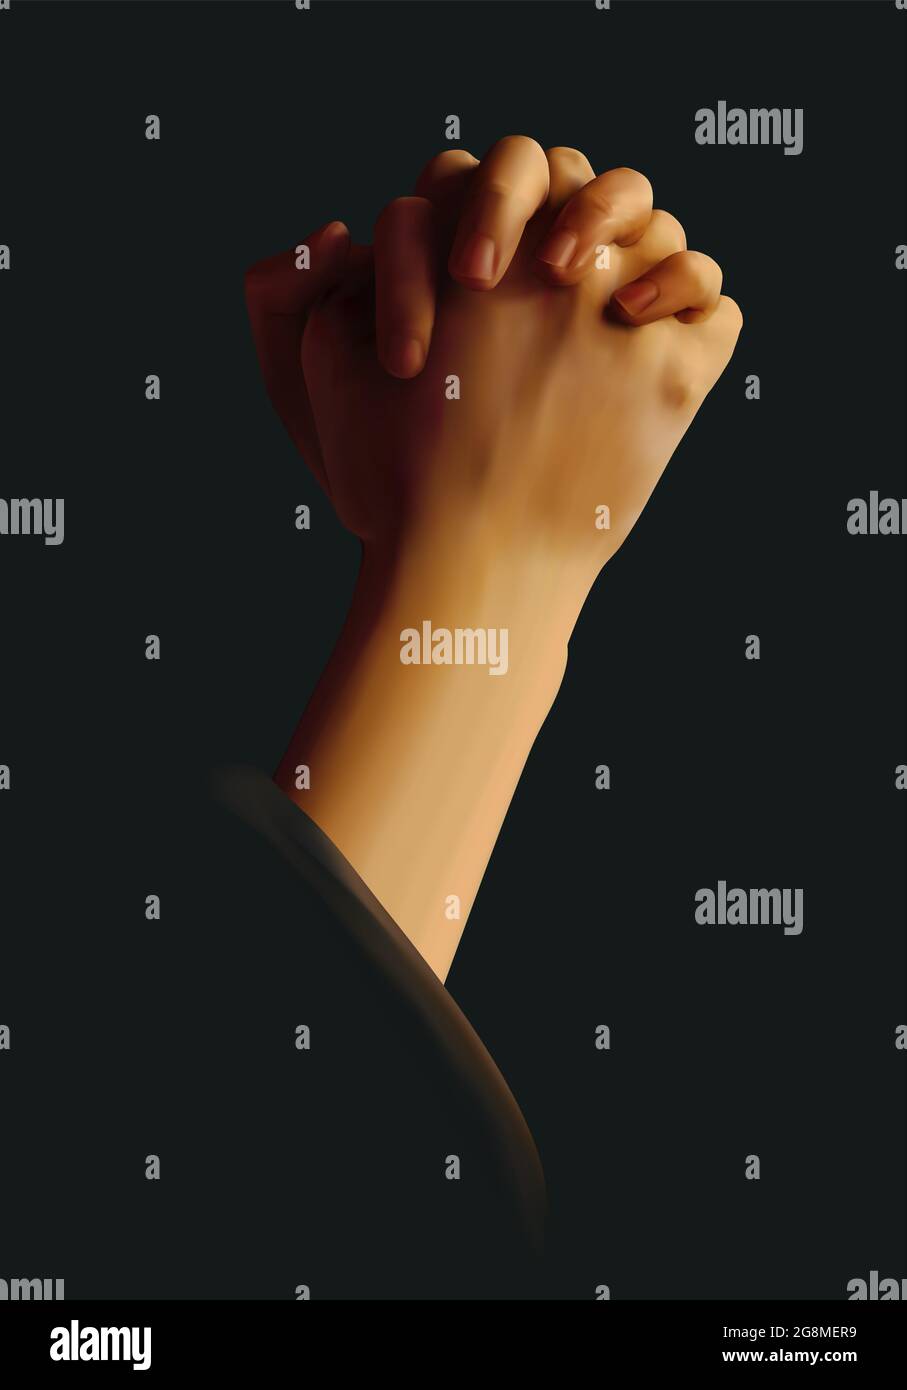 Realistic vector illustration of hands clasped in prayer against dark background Stock Vector